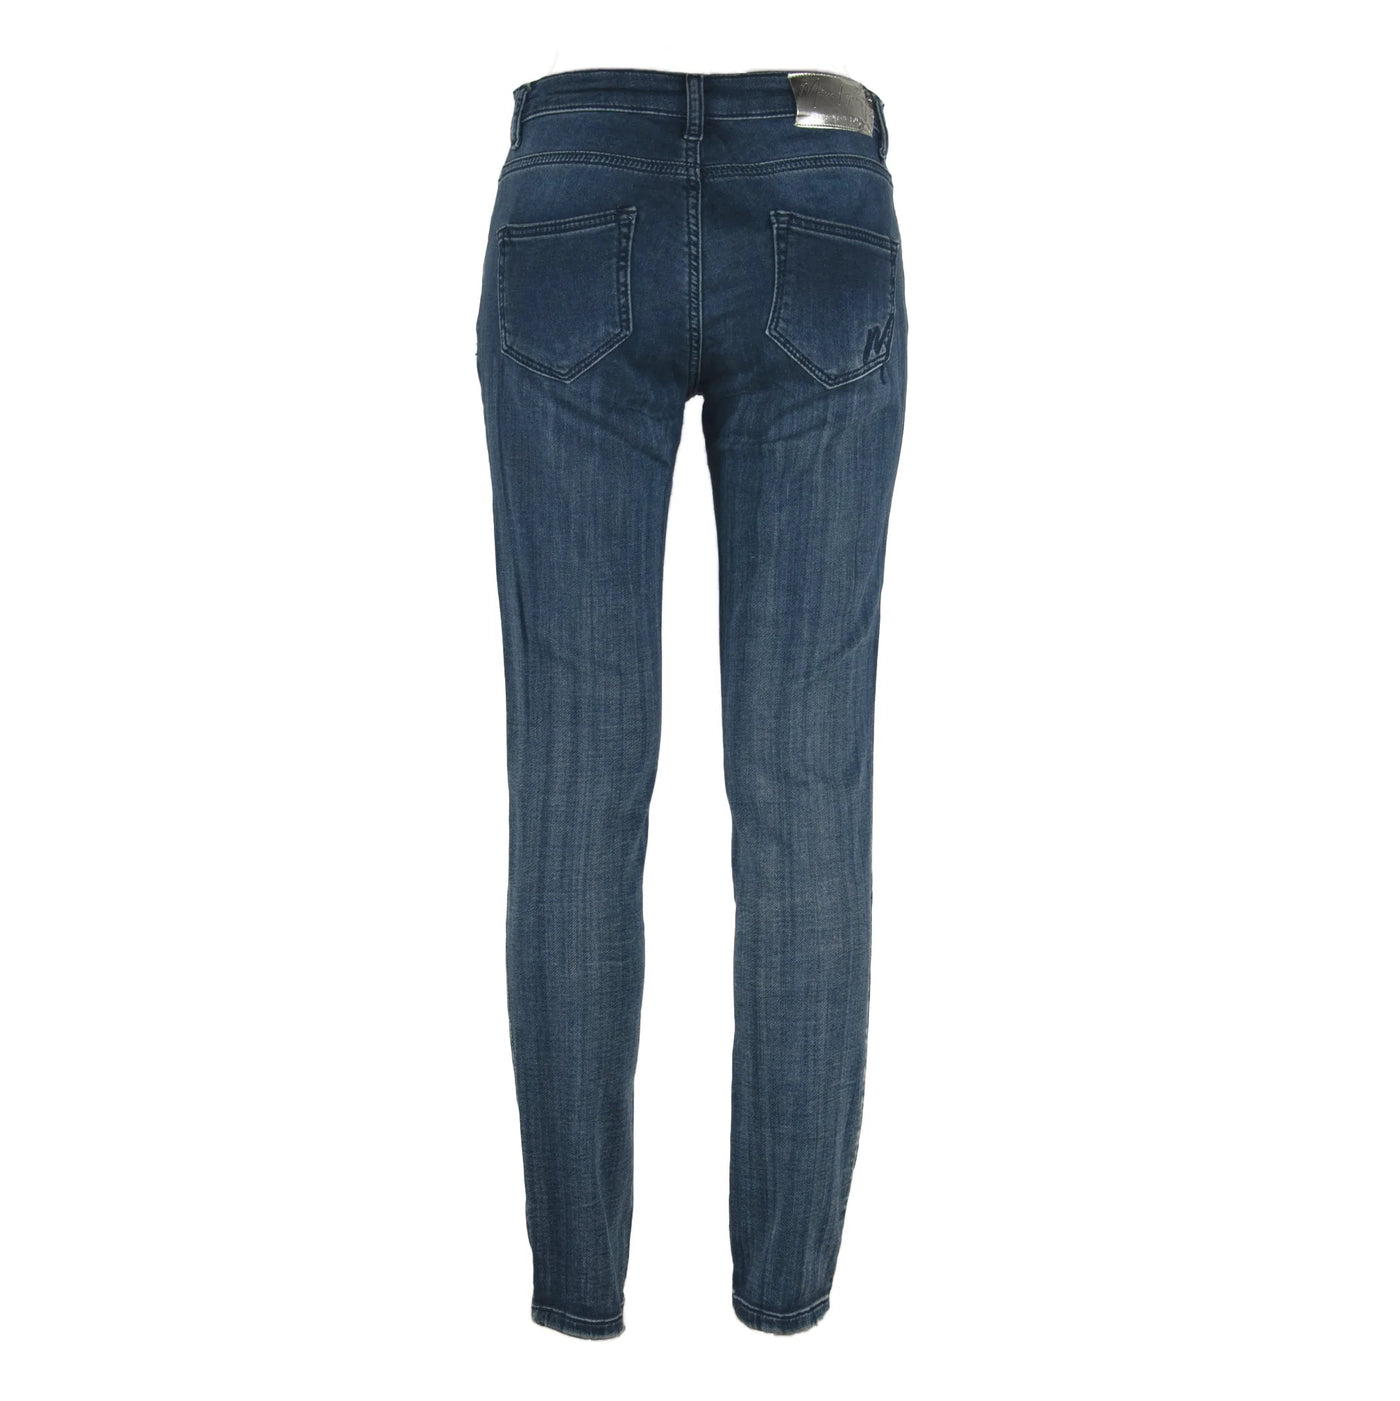 Maison Espin Blue Cotton Jeans & Pant Blue, feed-agegroup-adult, feed-color-Blue, feed-gender-female, Jeans & Pants - Women - Clothing, Maison Espin, W26 | IT40, W29 | IT43 at SEYMAYKA